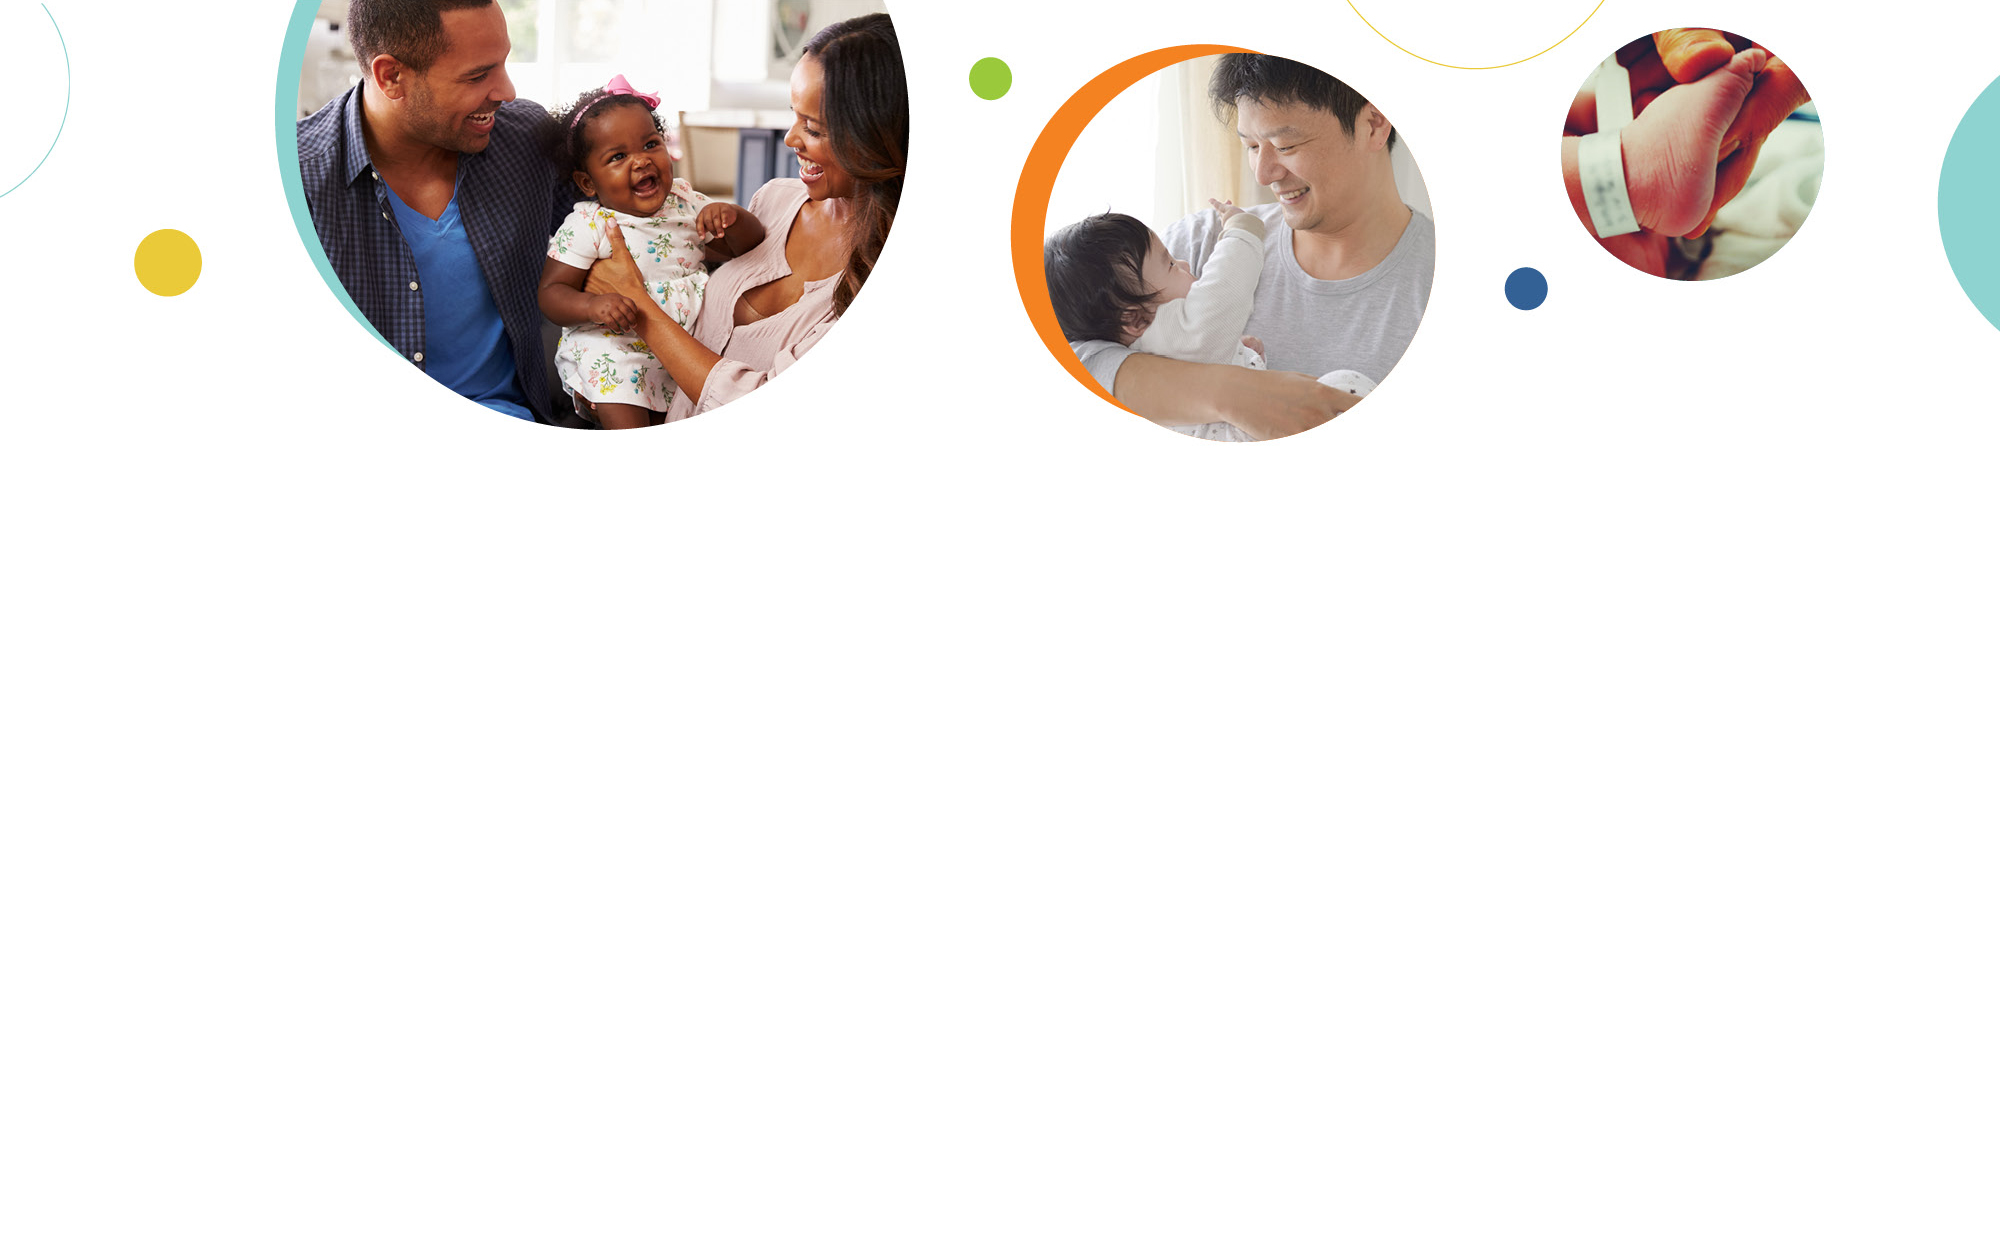 A series of three images related to infant health and development, including two smiling parents holding an infant (left), a father smiling and holding an infant (middle), and an image of a newborn’s foot (right). 